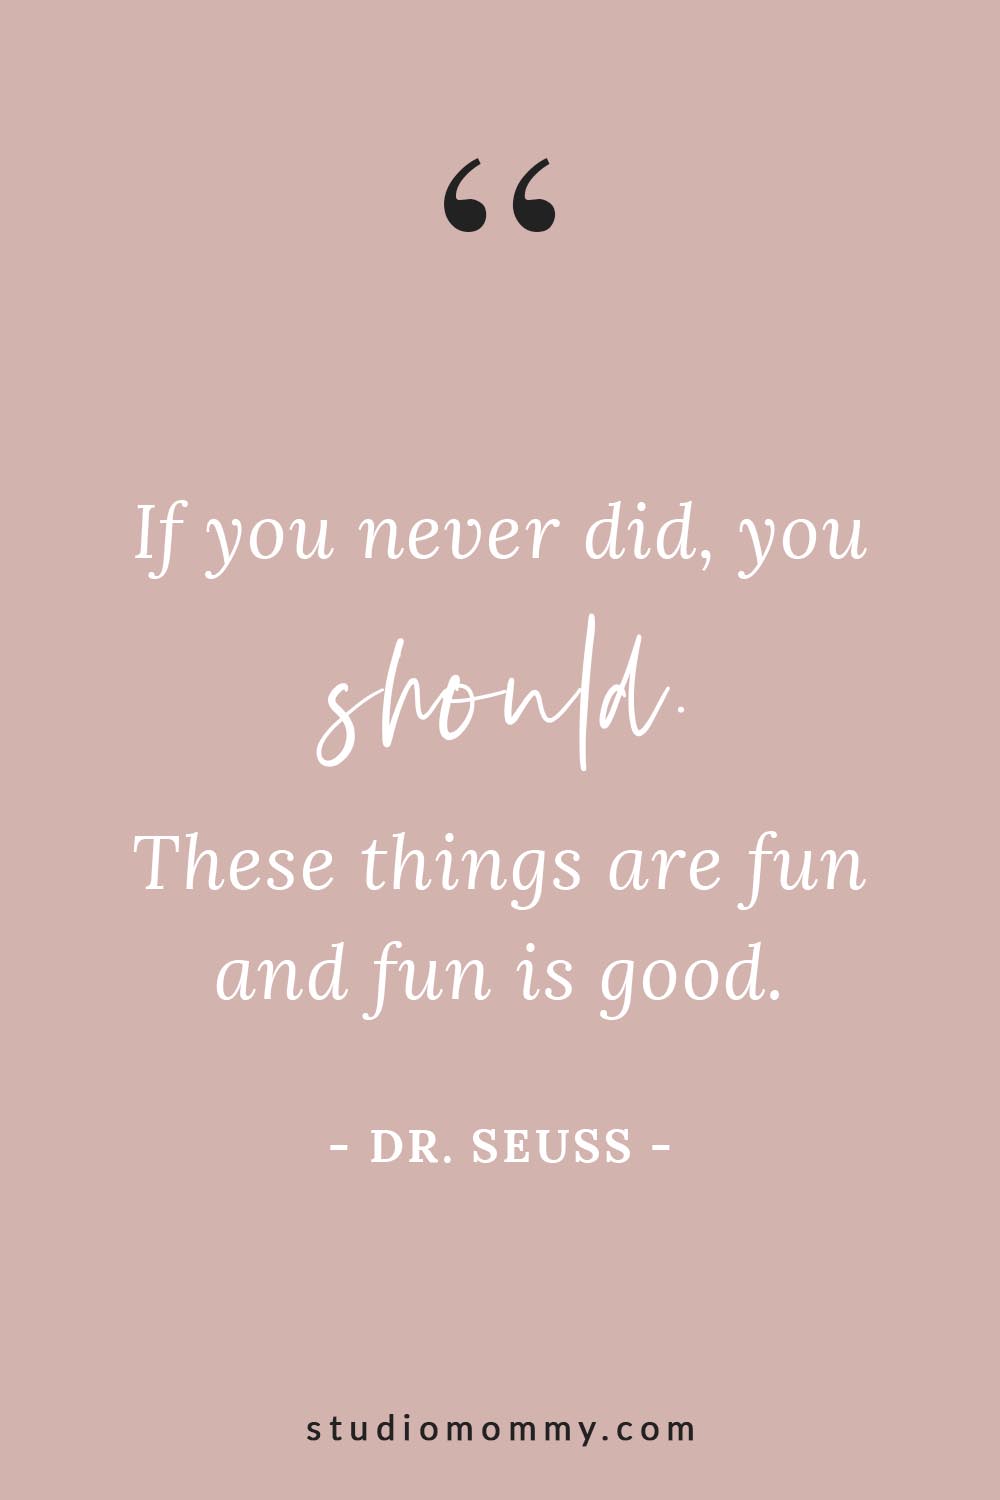 If you never did, you should. These things are fun and fun is good. - Dr. Seuss @studiomommy